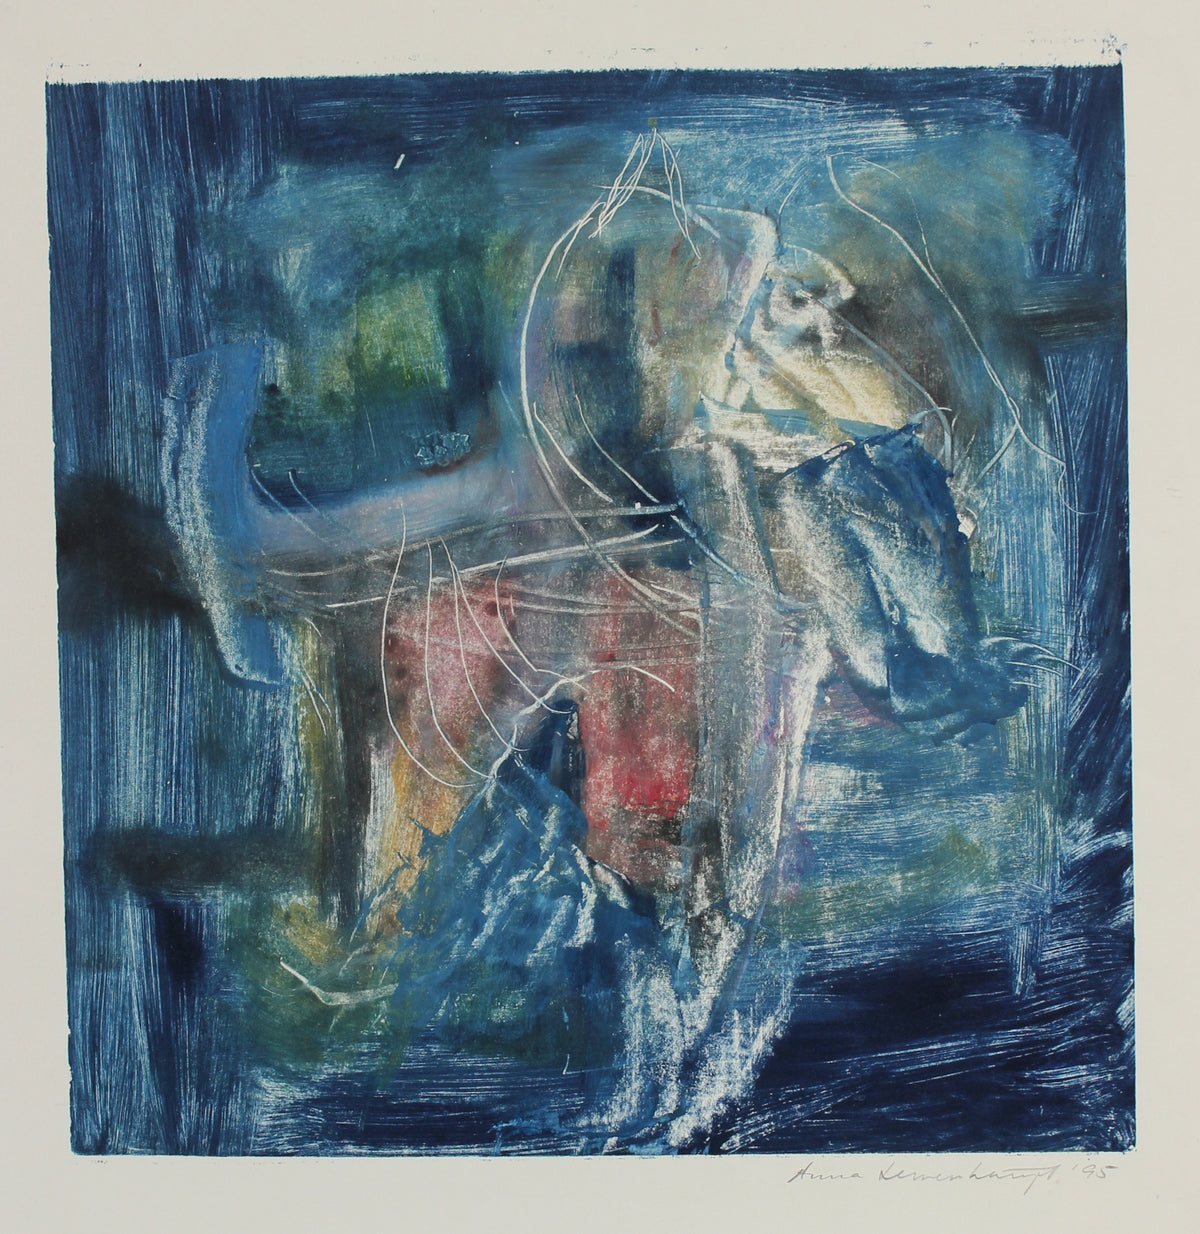 Blue Abstracted Color Study&lt;br&gt;1995 Mixed Media Monotype&lt;br&gt;&lt;br&gt;#99166